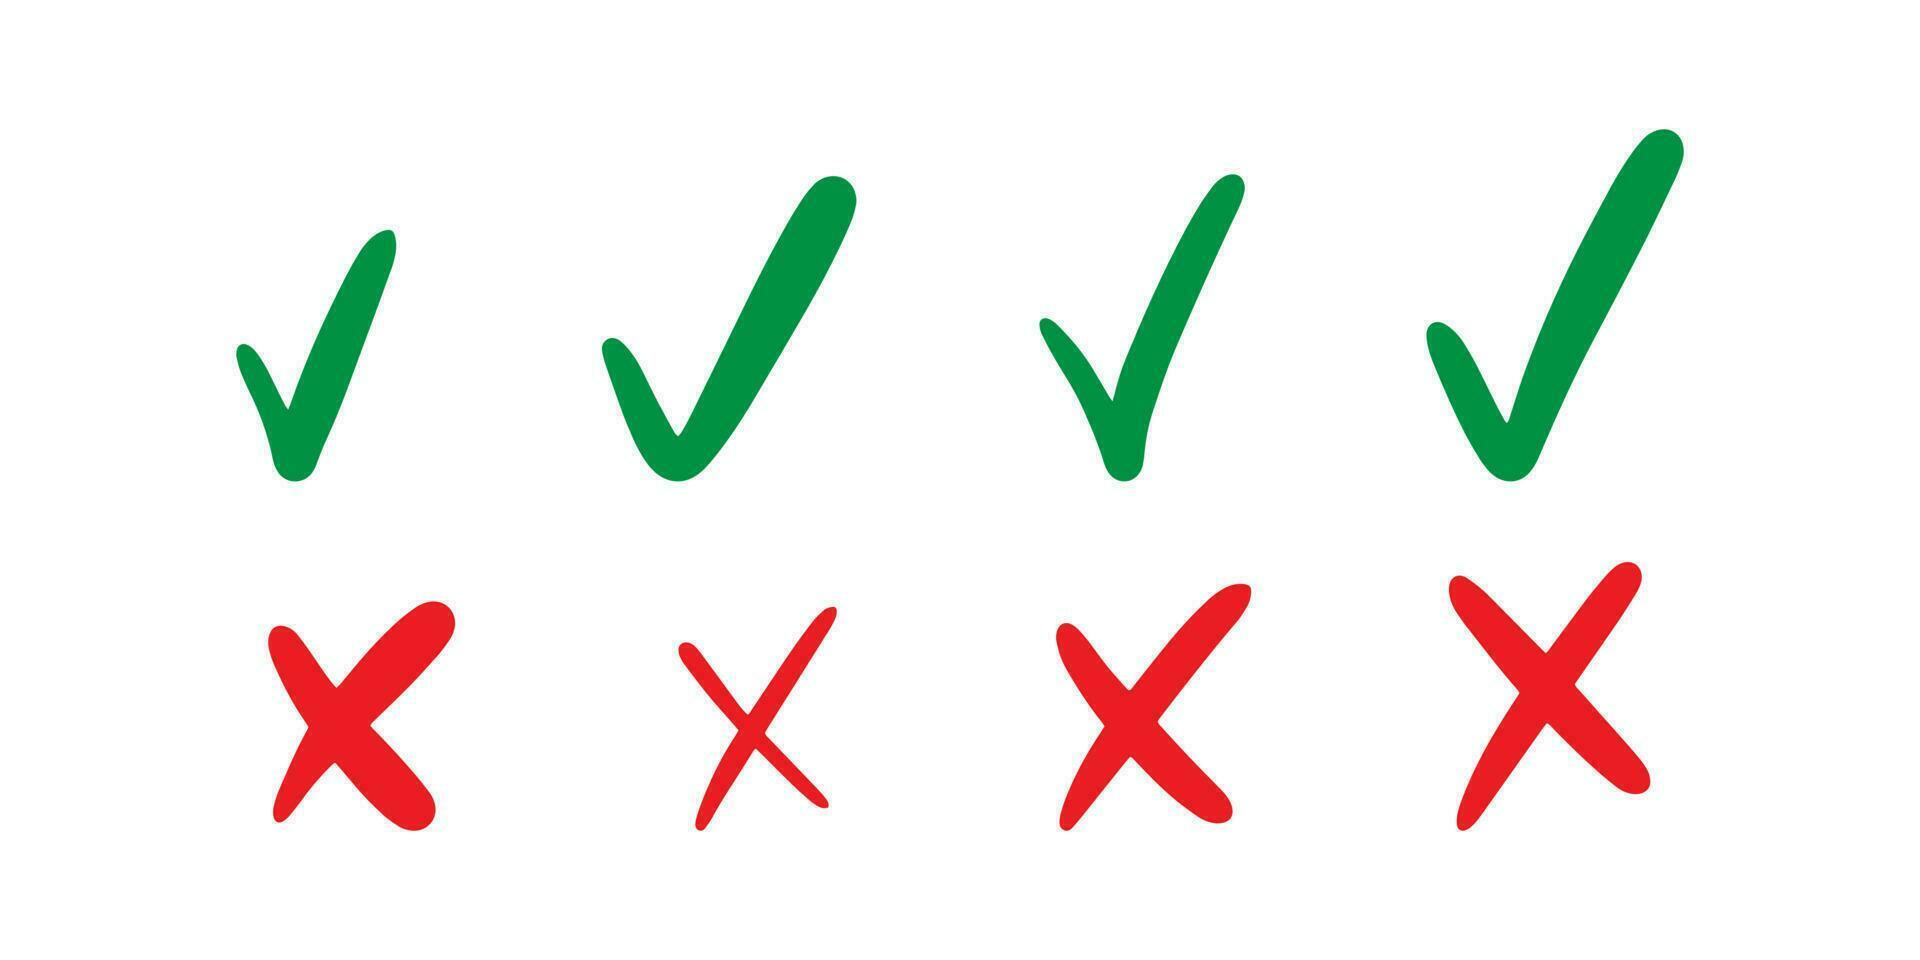 Check and Cross sign elements. Vector buttons for vote, election choice, tick marks, approval signs design. Red X and green OK symbol icons